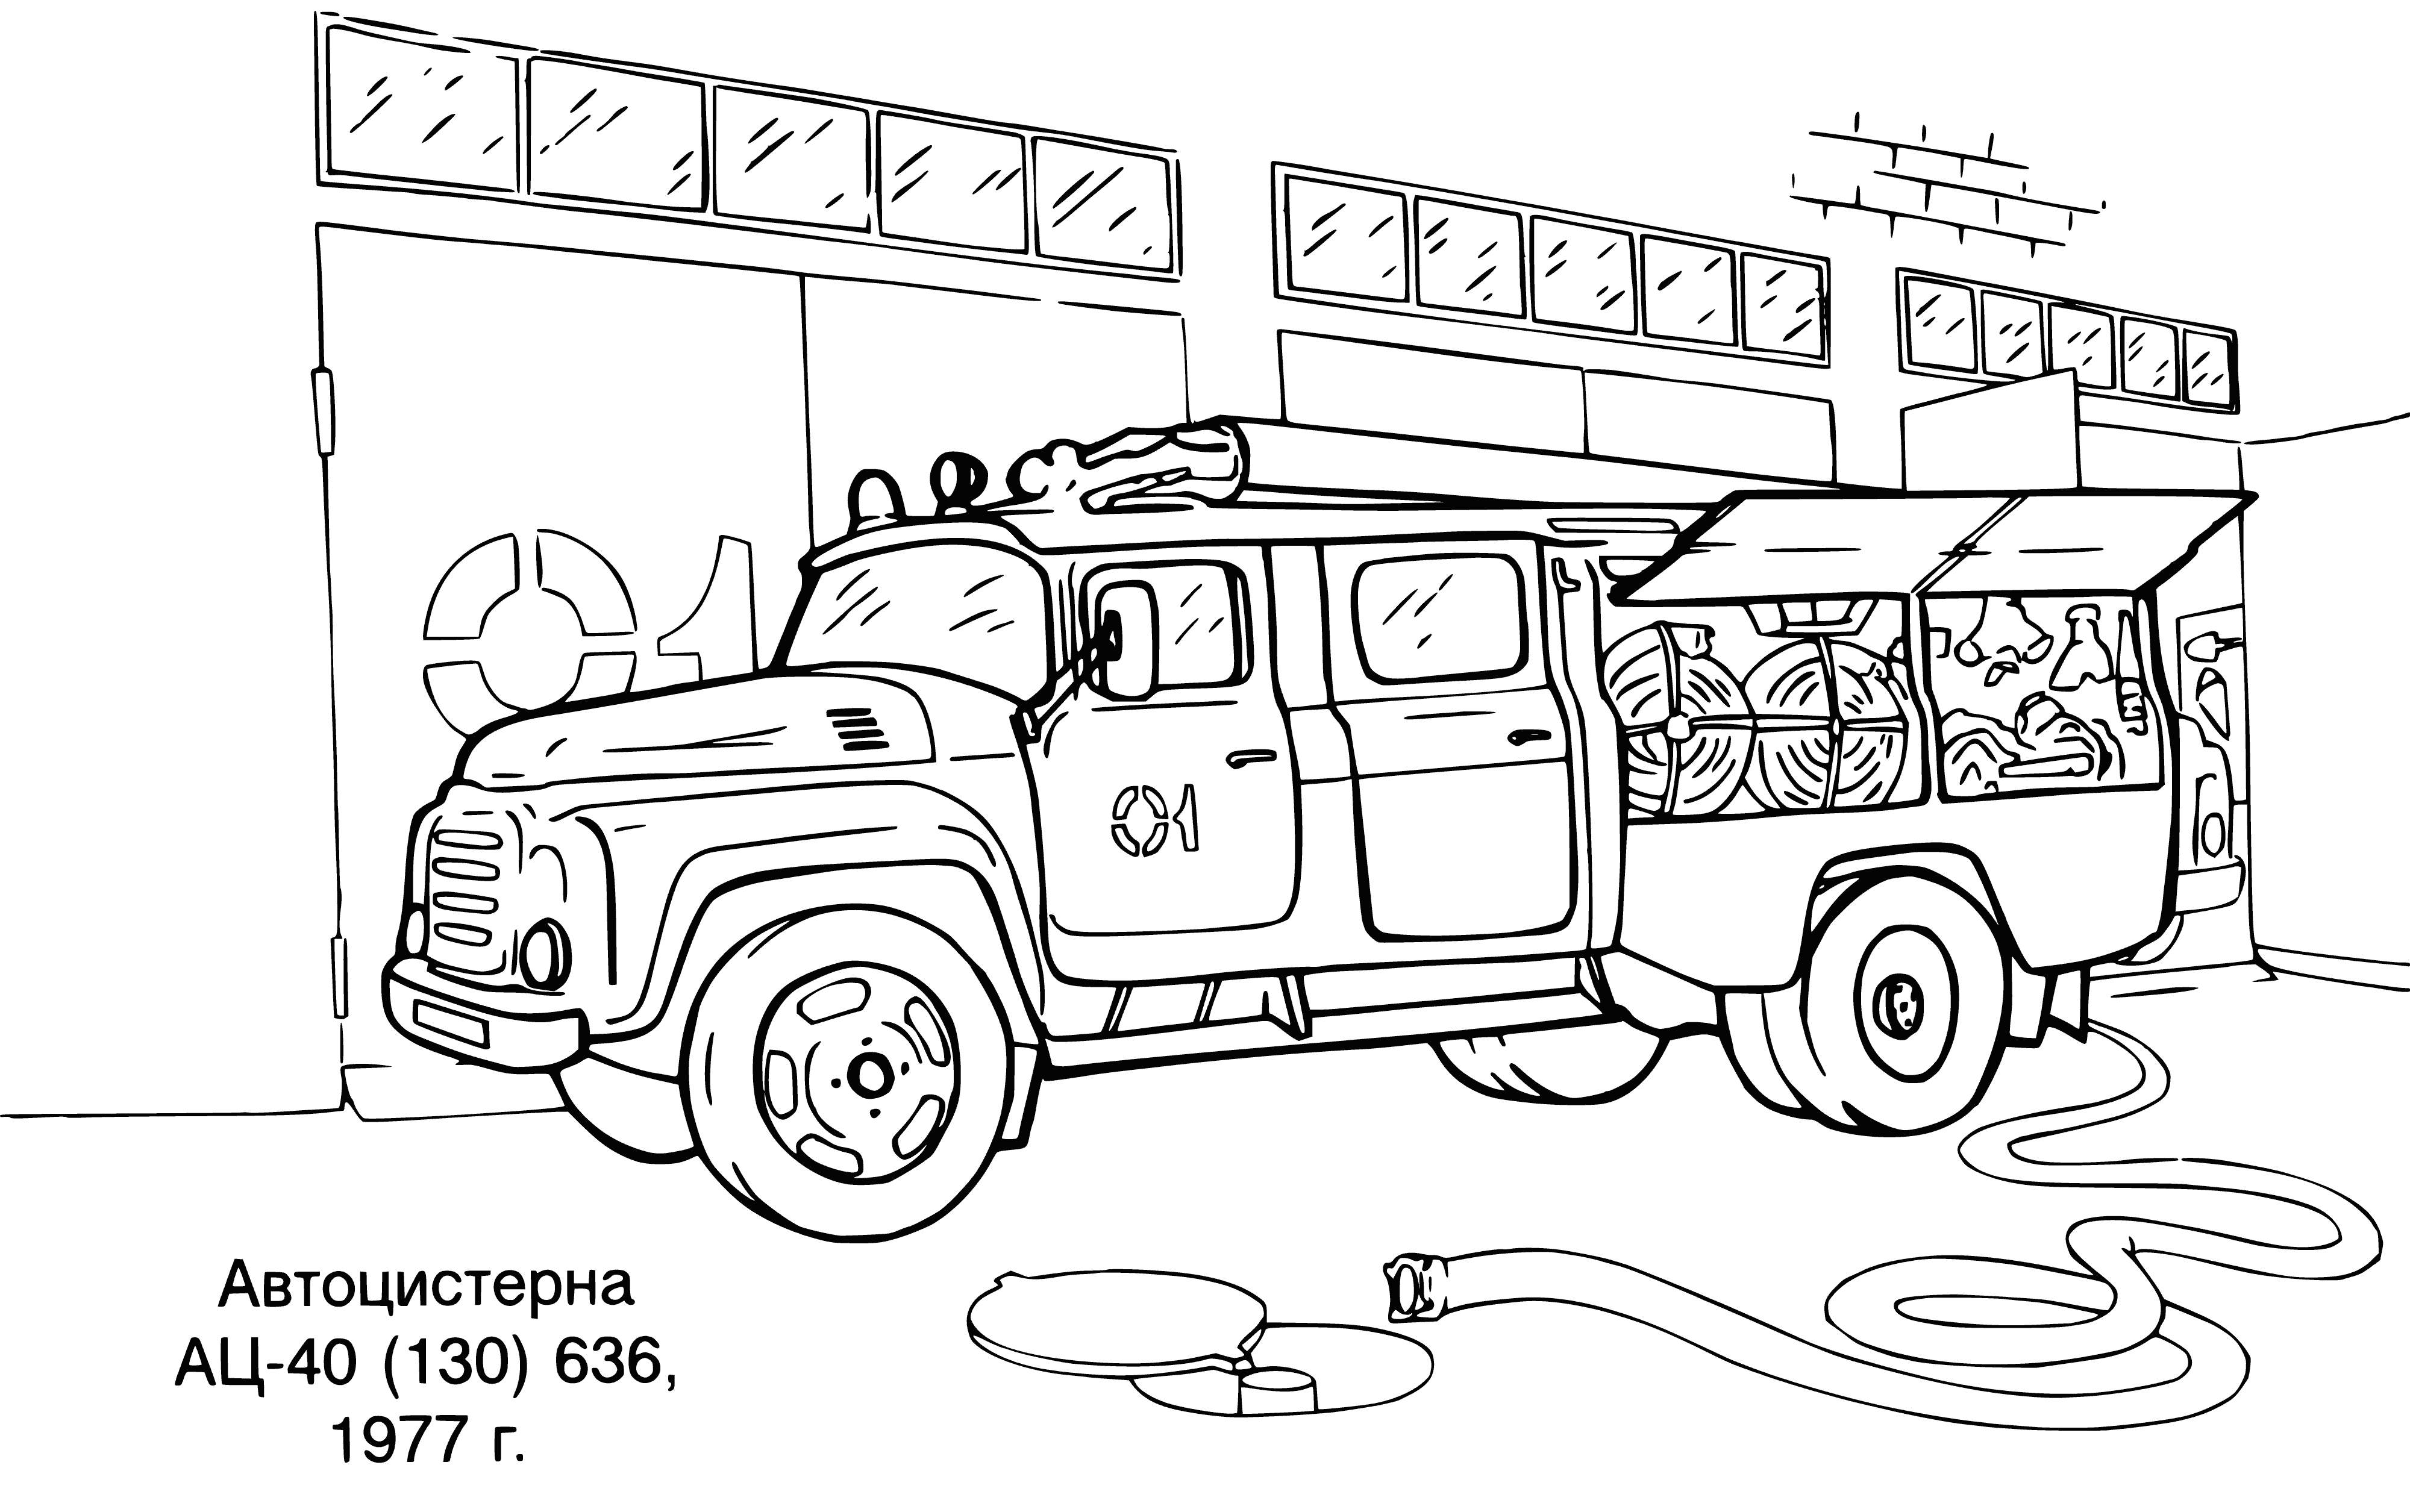 coloring page: Two tanker trucks park side-by-side, firefighters & officers talk w/engines running & hoses connected to hydrants.